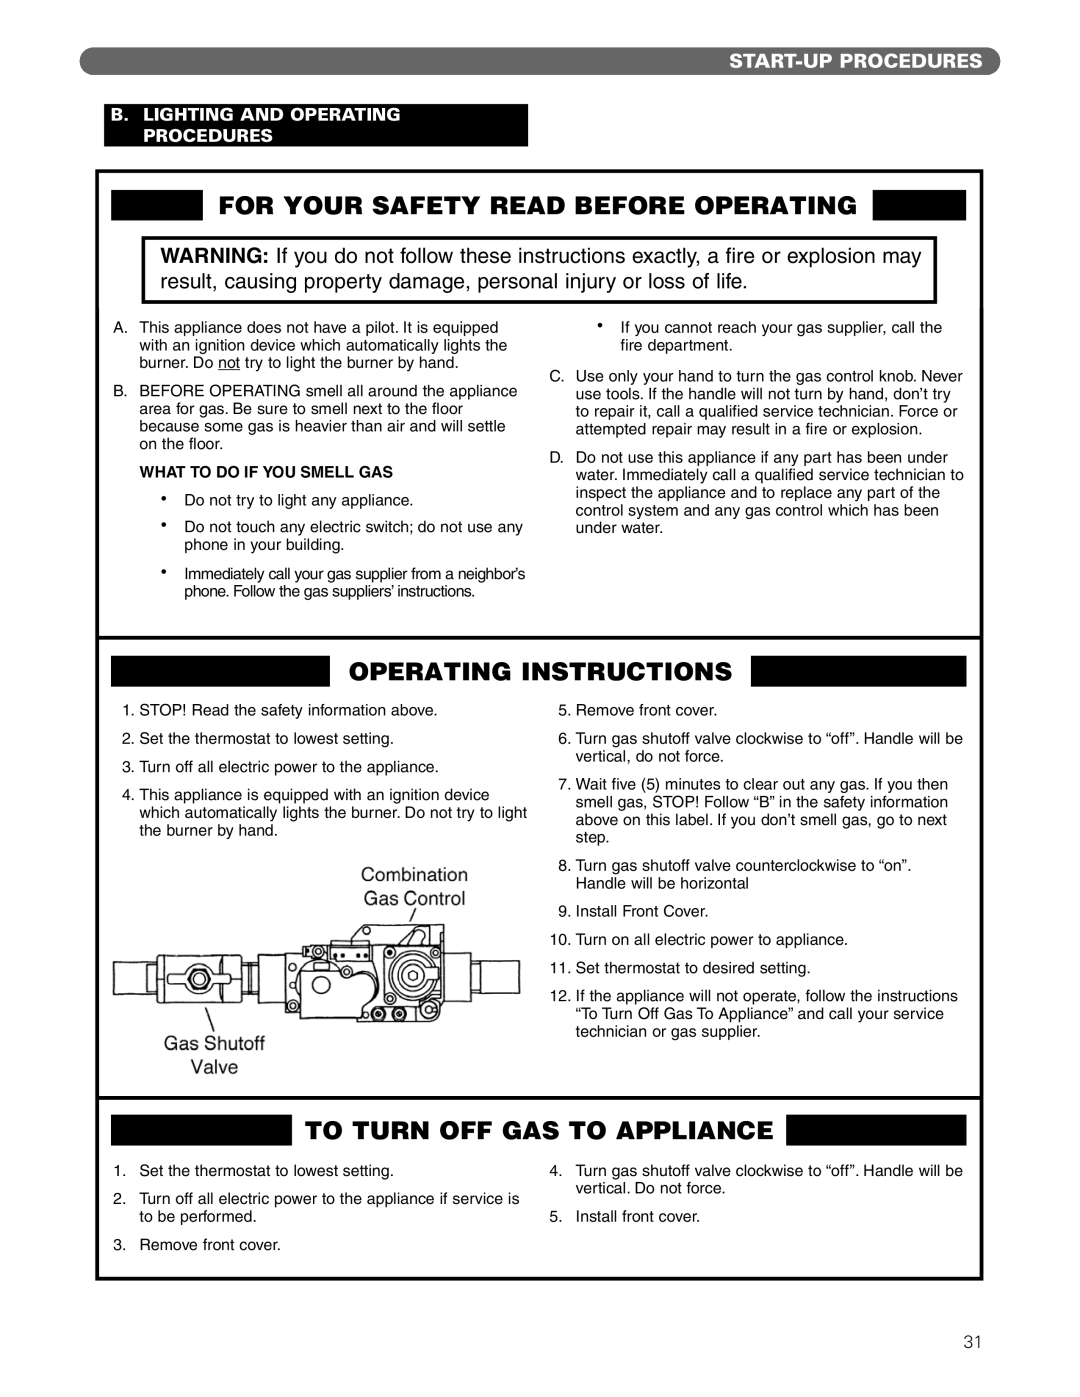 PB Heat Gas Boiler manual For Your Safety Read Before Operating, Operating Instructions, To Turn Off Gas To Appliance 